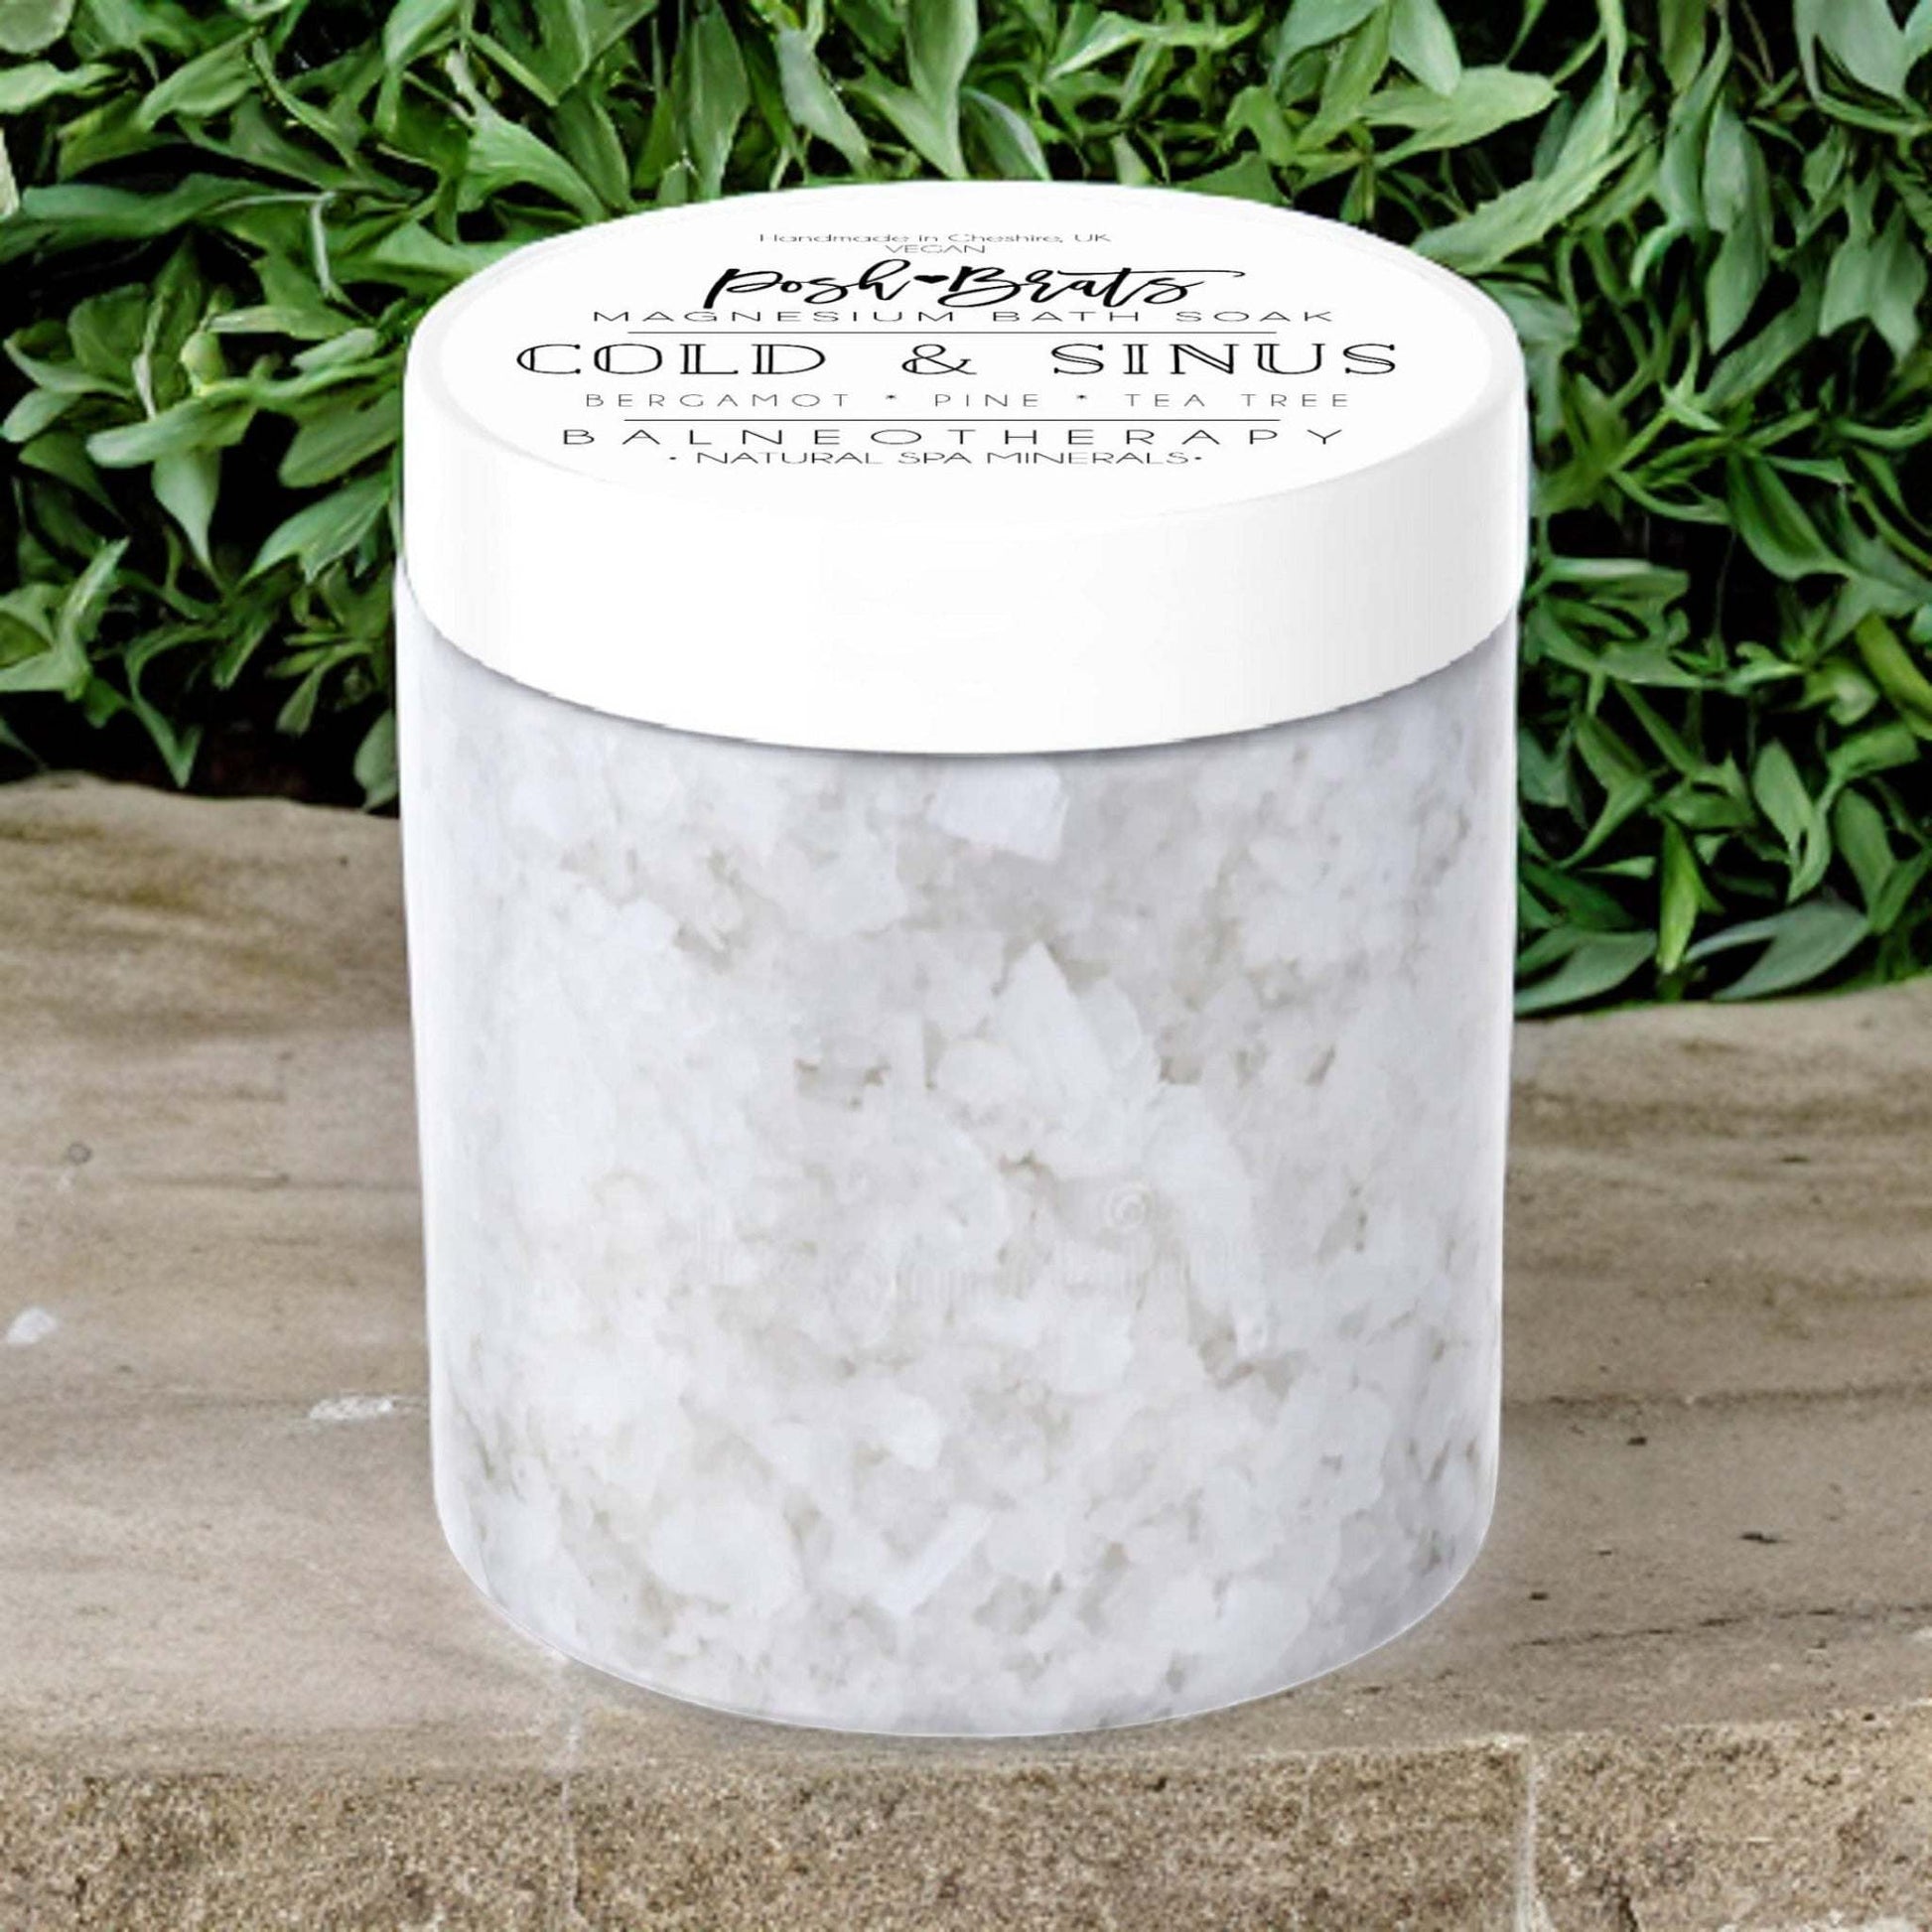 Ease your cold symptoms with our Cold Sinus Relief Bath Salt magnesium soak. Health and relaxation in one package!